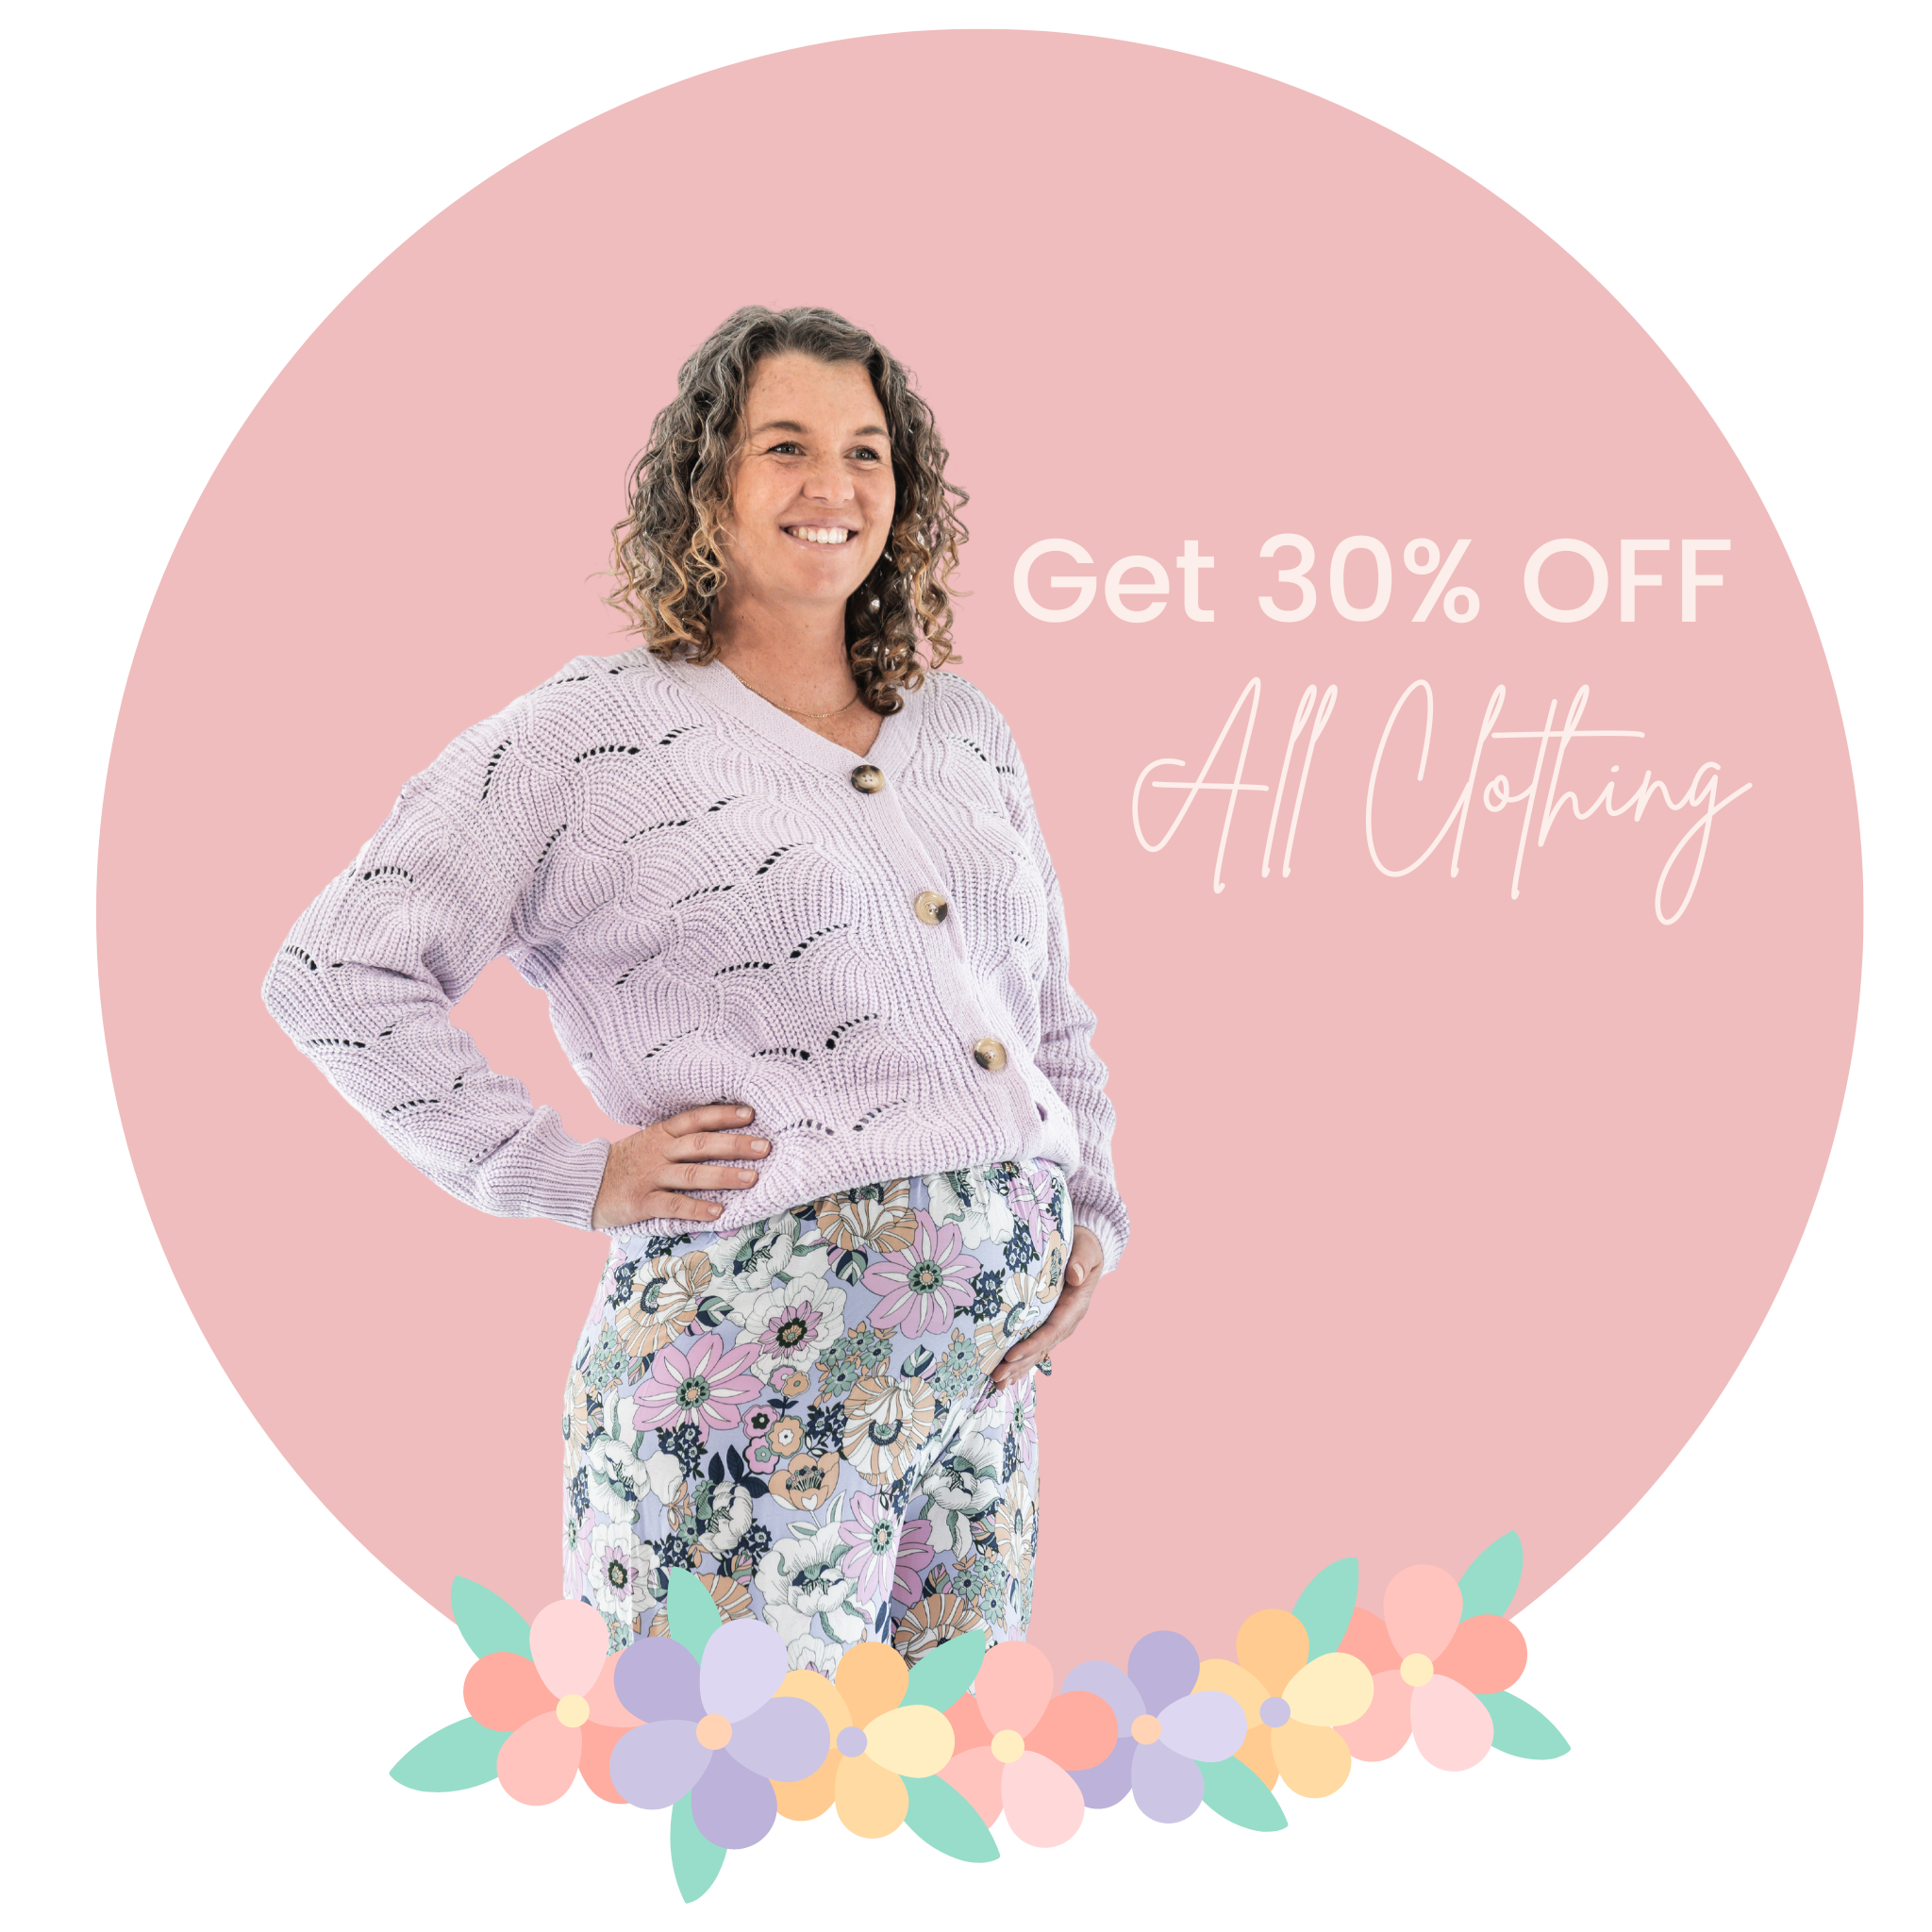 30% OFF CLOTHING!